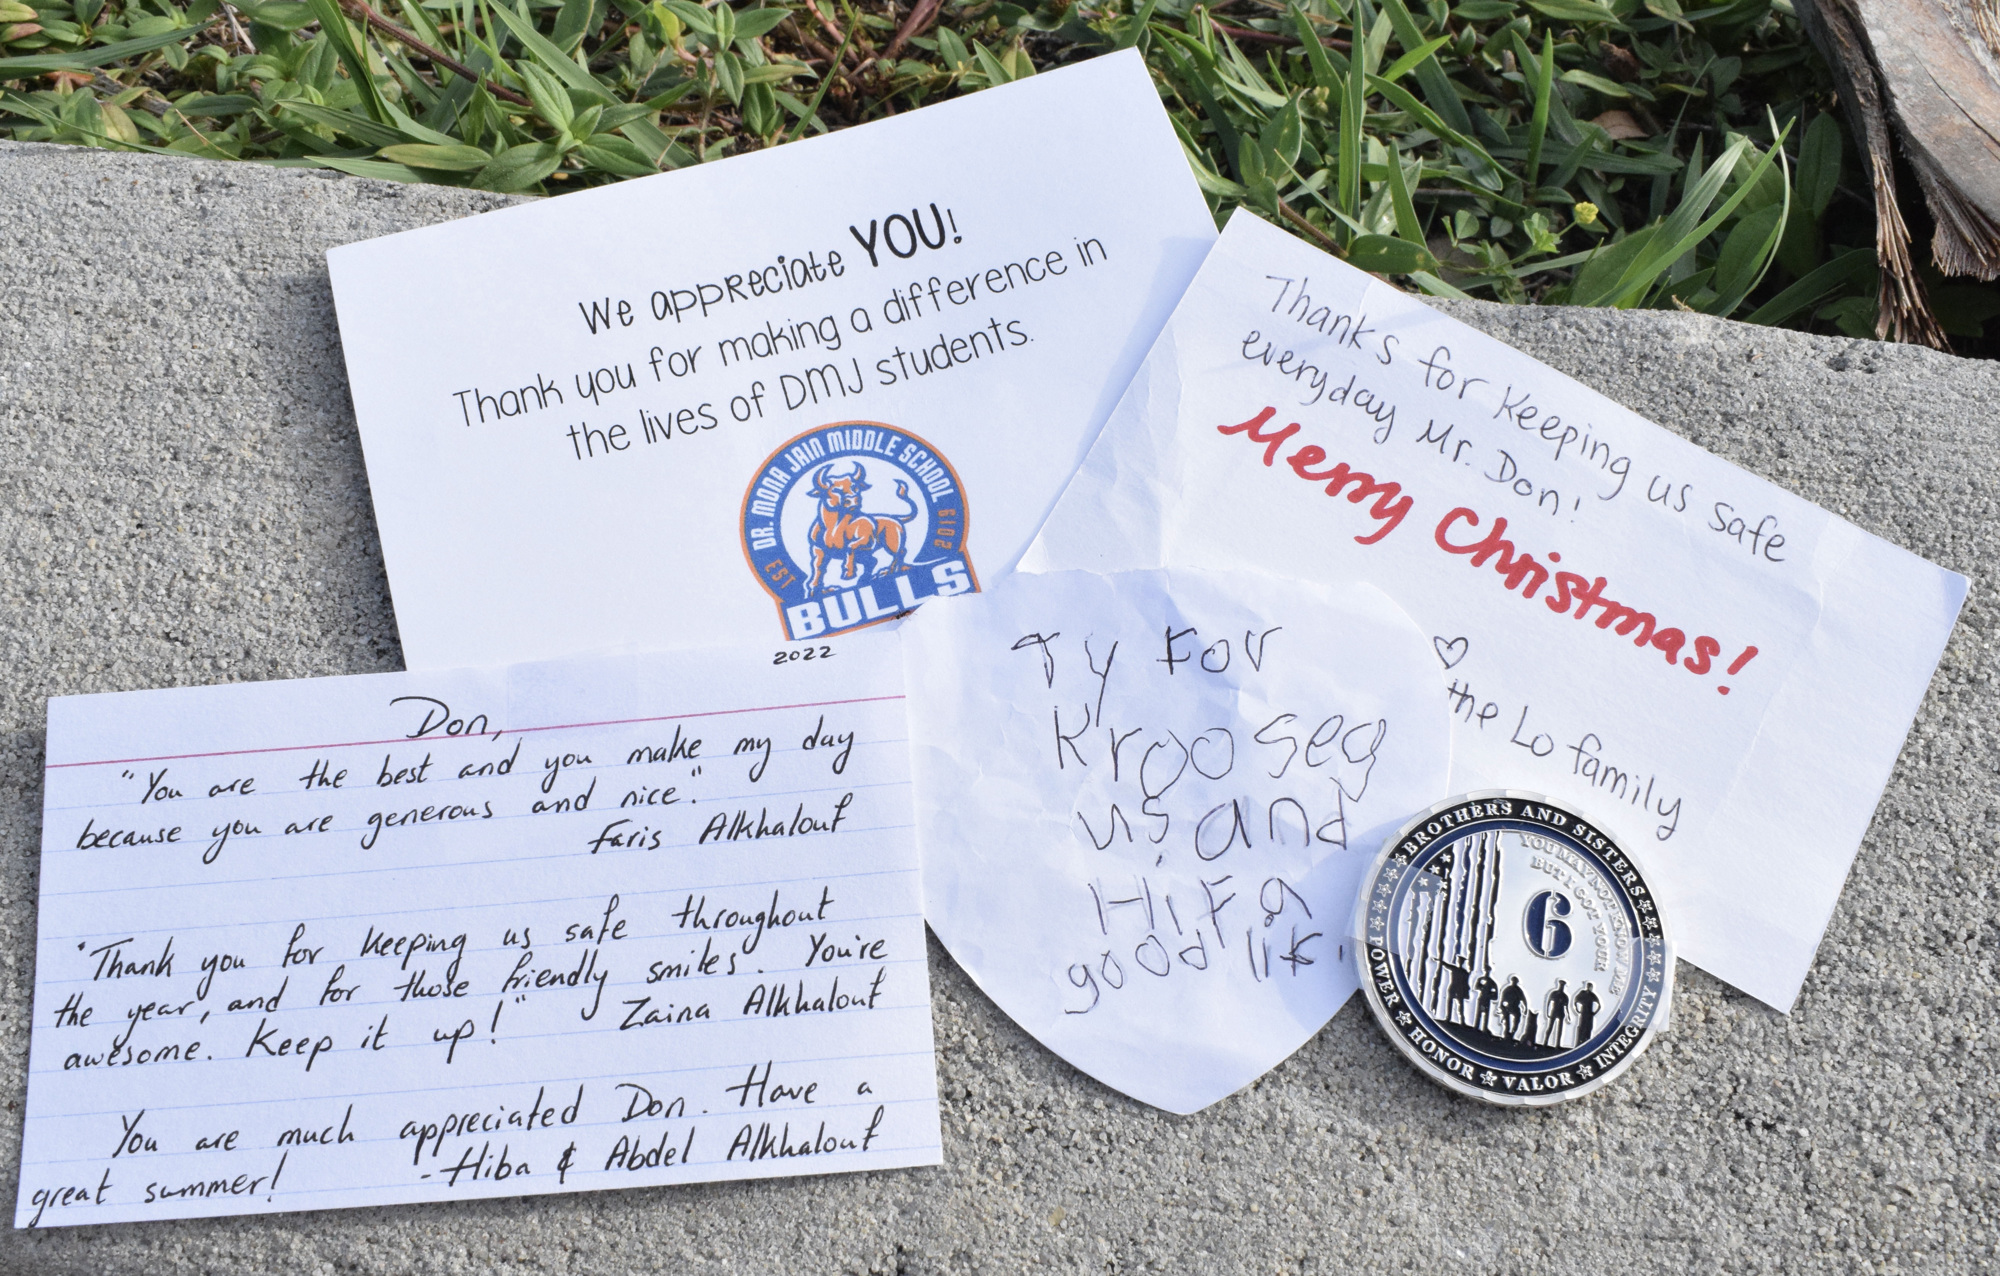 Indigo's Donald Karn, a crossing guard at the intersection of 44th Avenue East and Wood Fern Trail, has received dozens of notes and cards from students and families. (Photo by Liz Ramos)